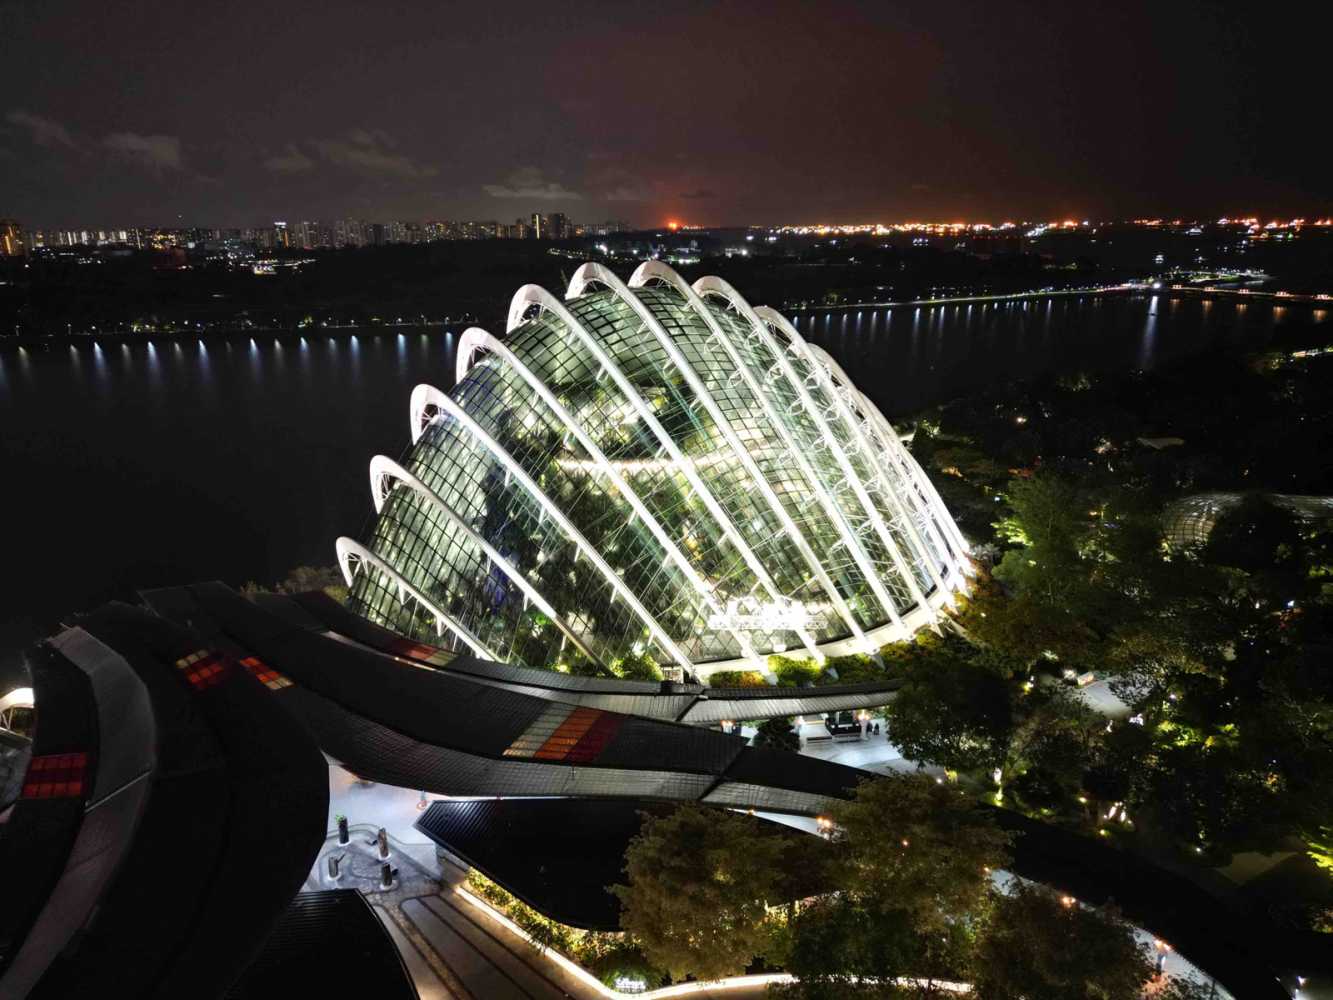 Ayrton’s Domino LT light up the Gardens on the Bay Conservatories